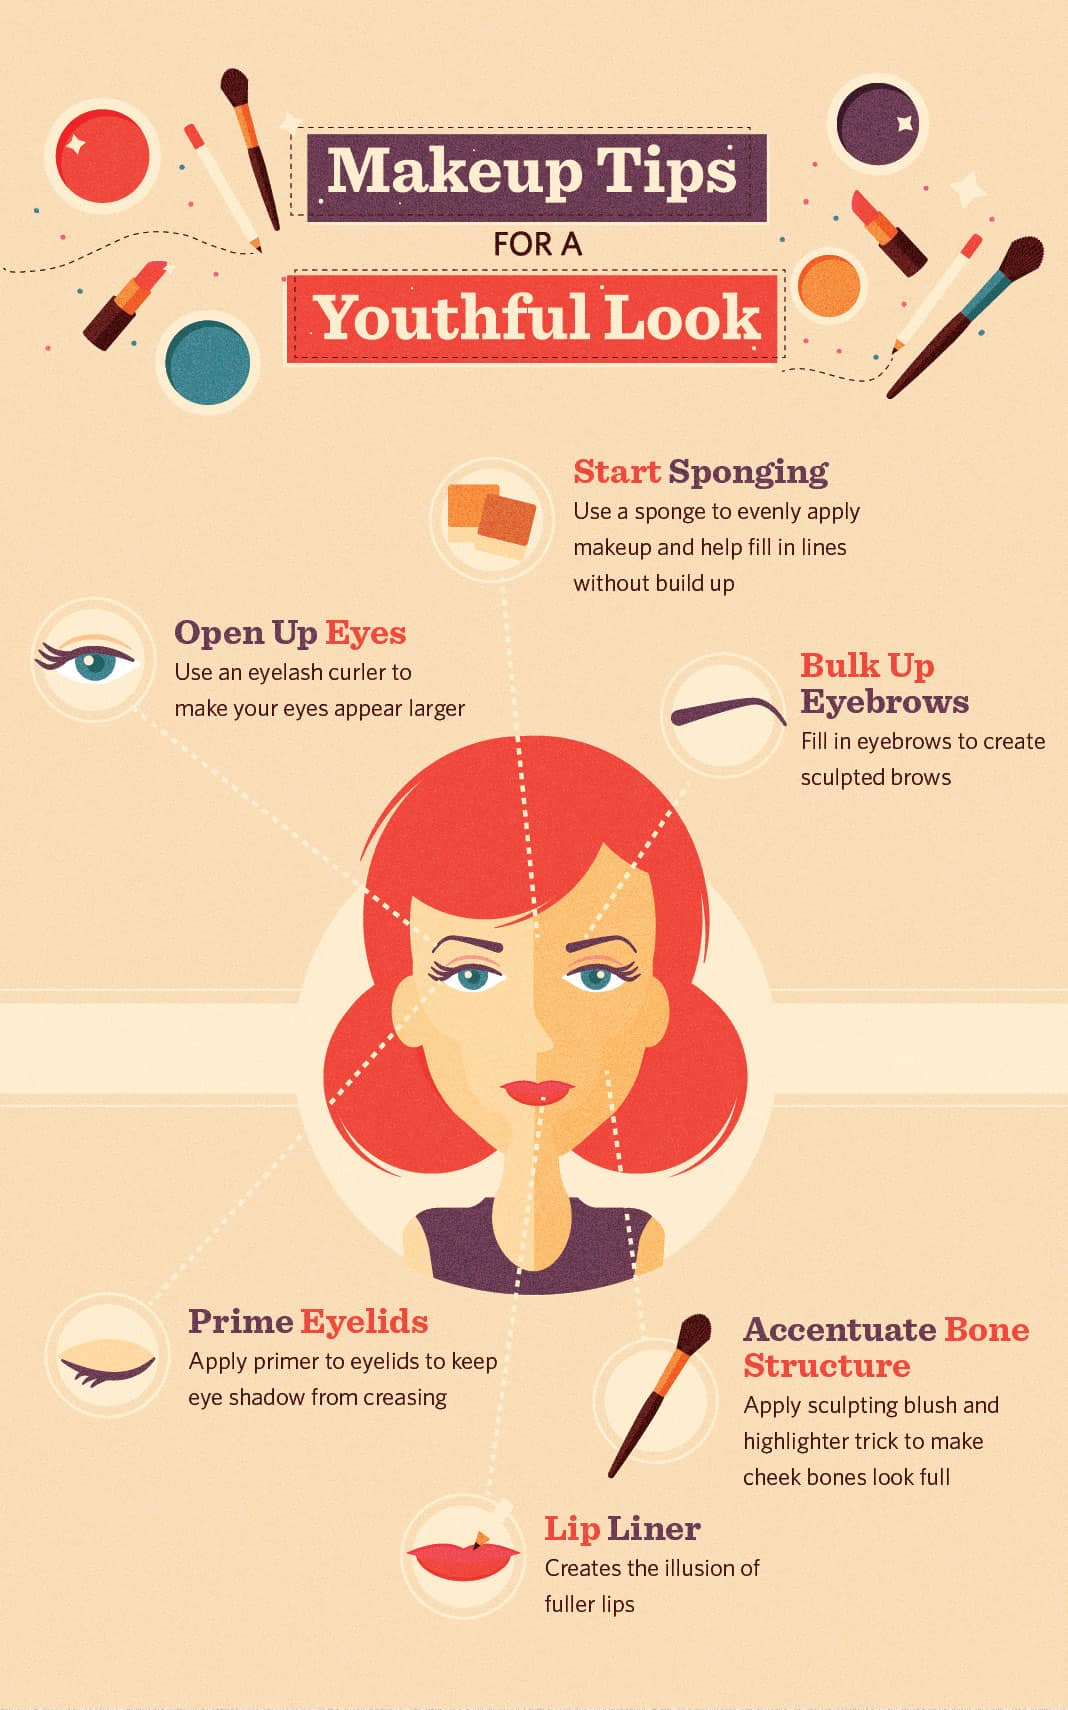 Anti Aging Makeup Tips for a youthful look